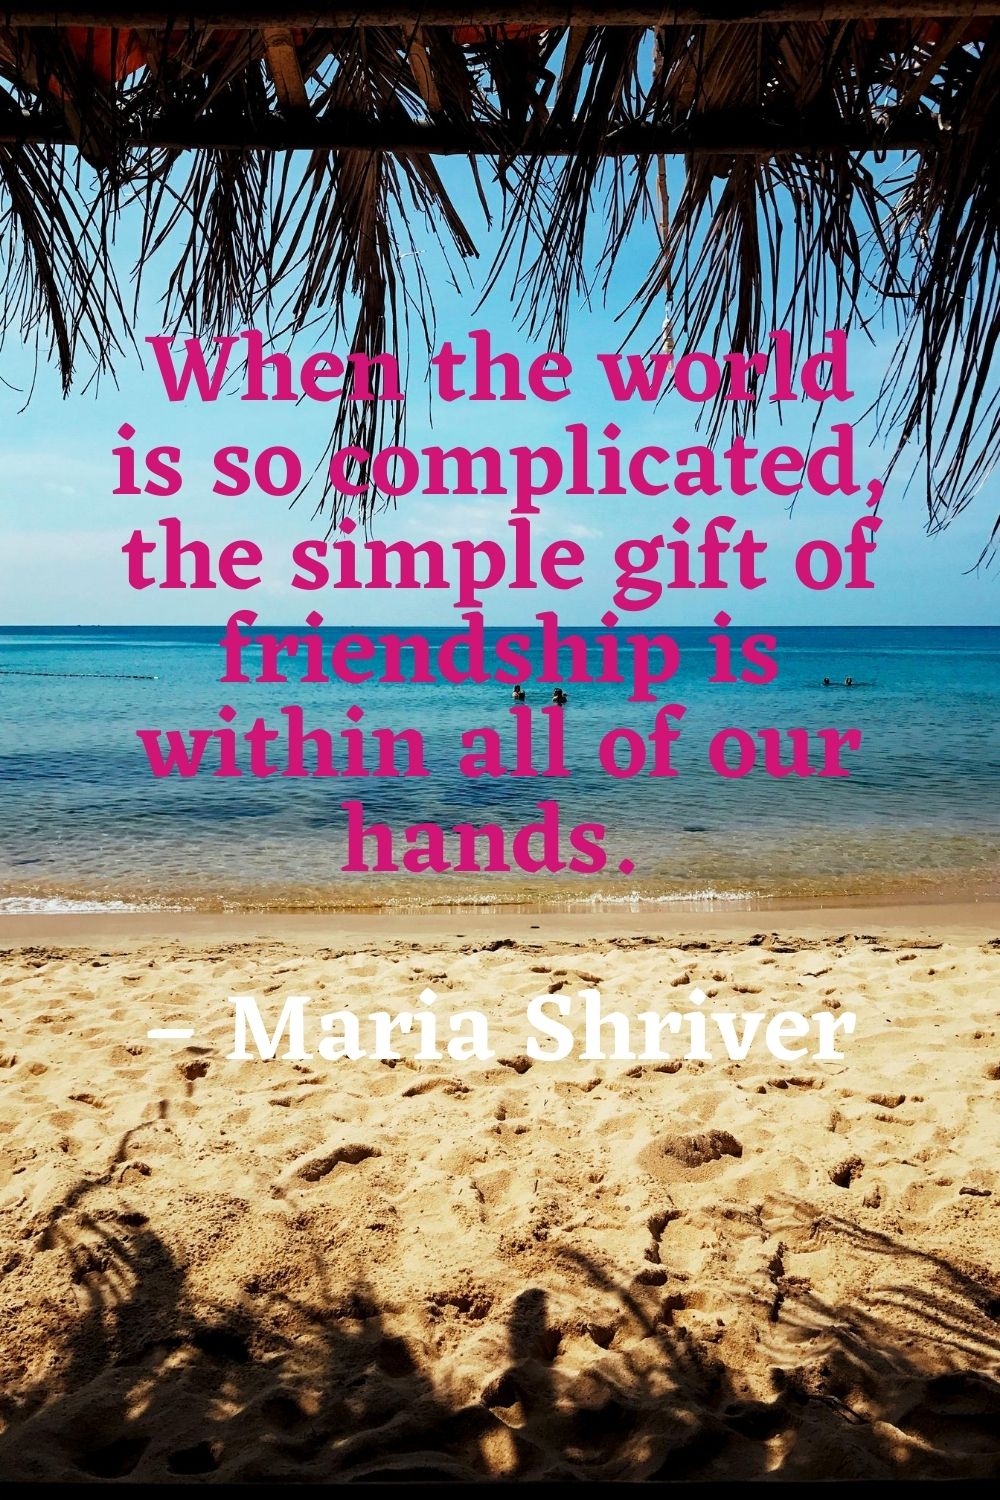 When the world is so complicated the simple gift of friendship is within all of our hands. – Maria Shriver